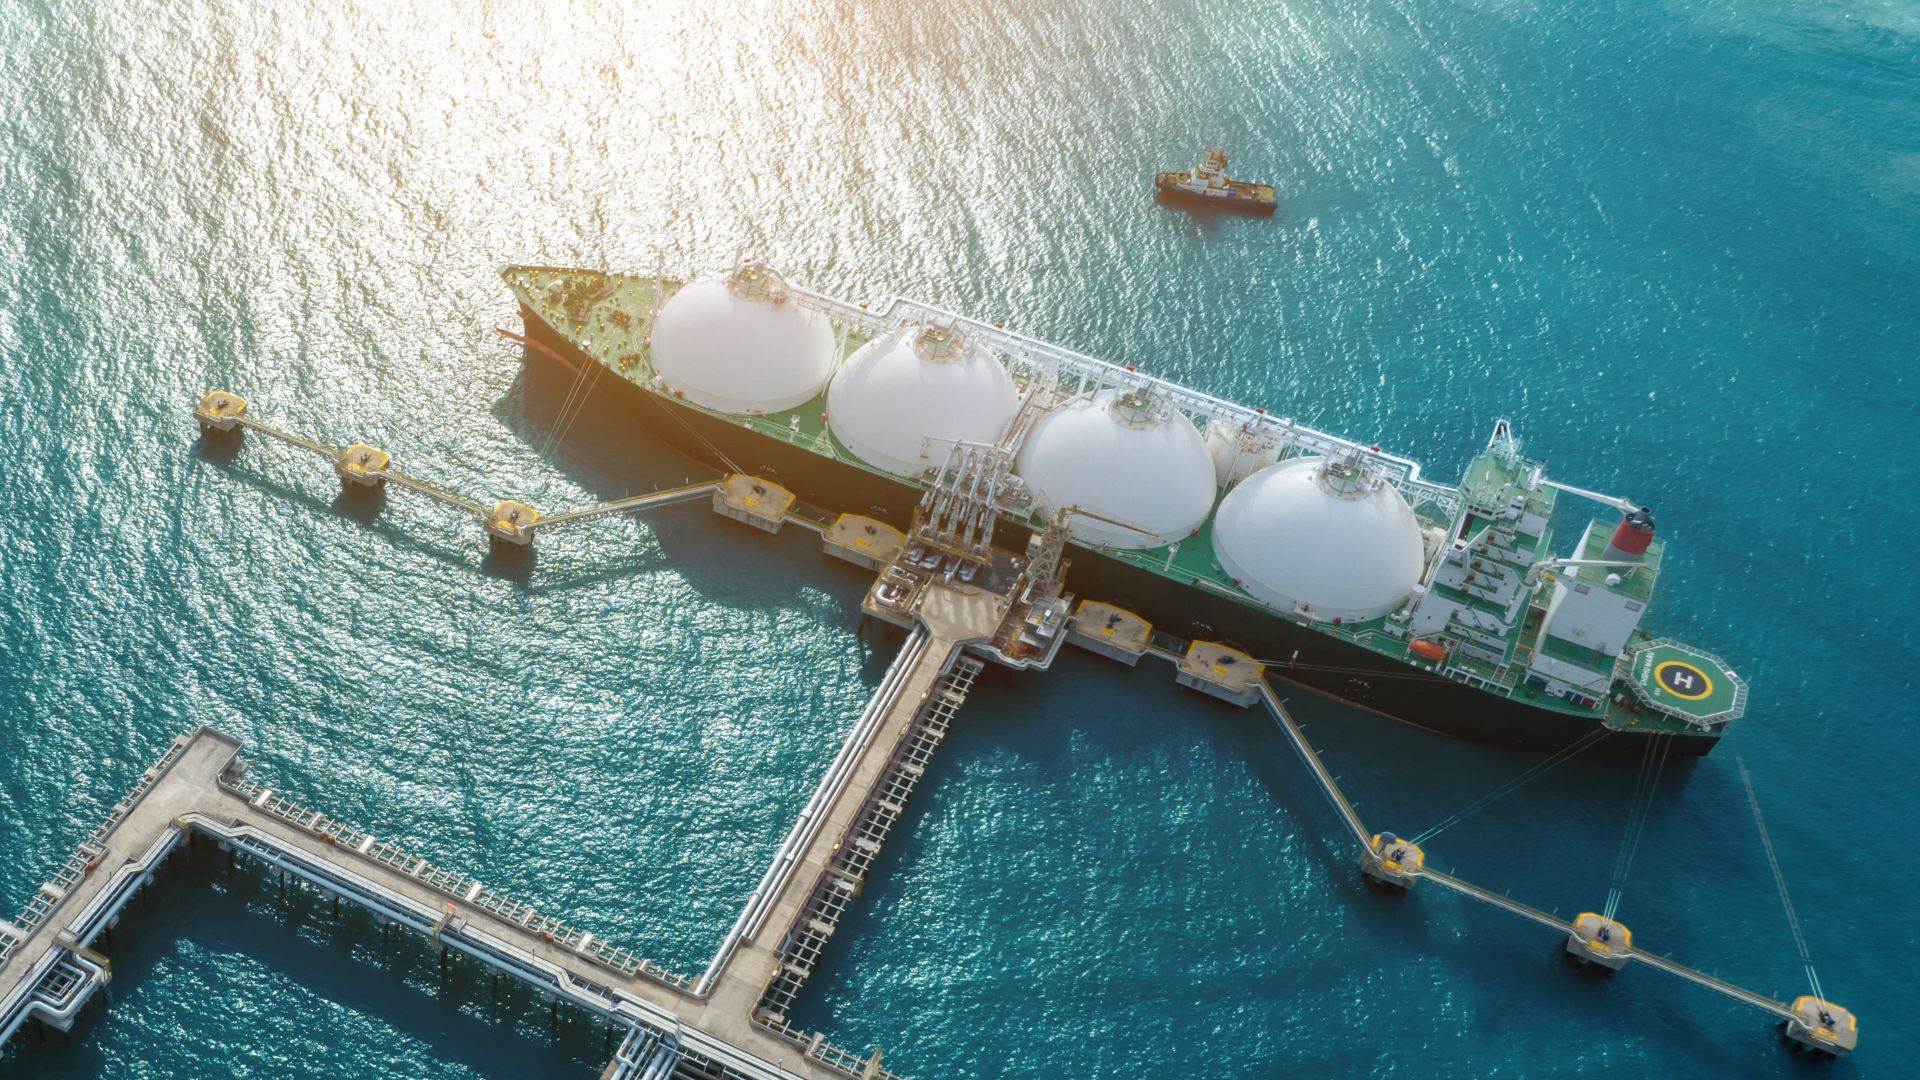 LNG (Liquified Natural Gas) tanker anchored in Gas terminal gas tanks for storage